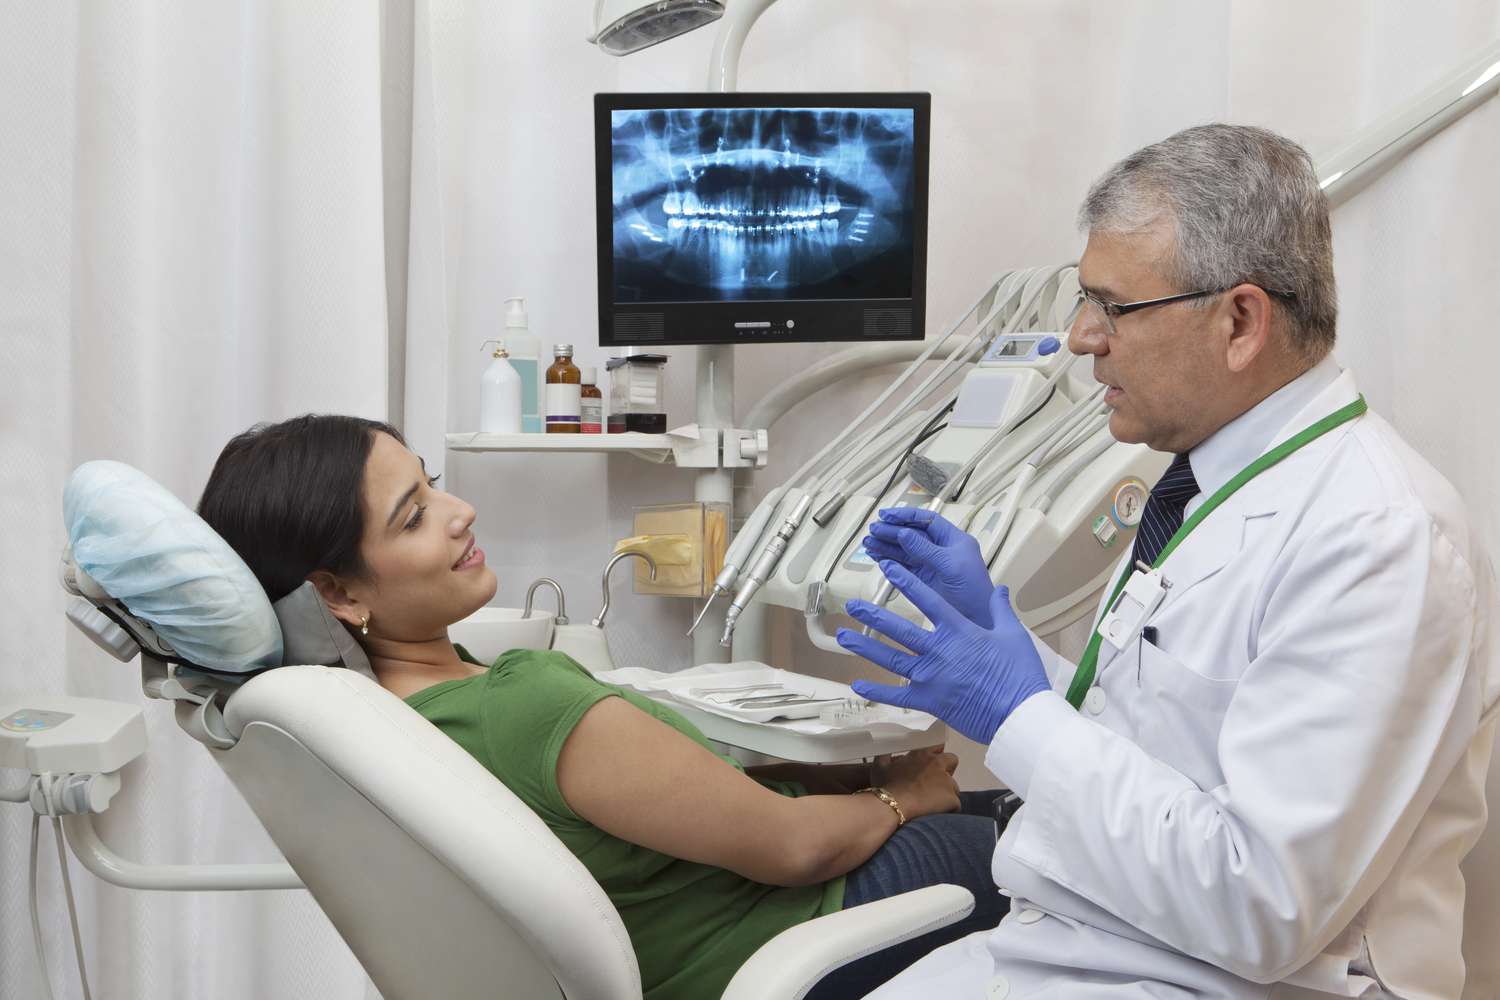 Which Dental Professional Might Be Trained By A Dentist Instead Of A Formal Educational Program?